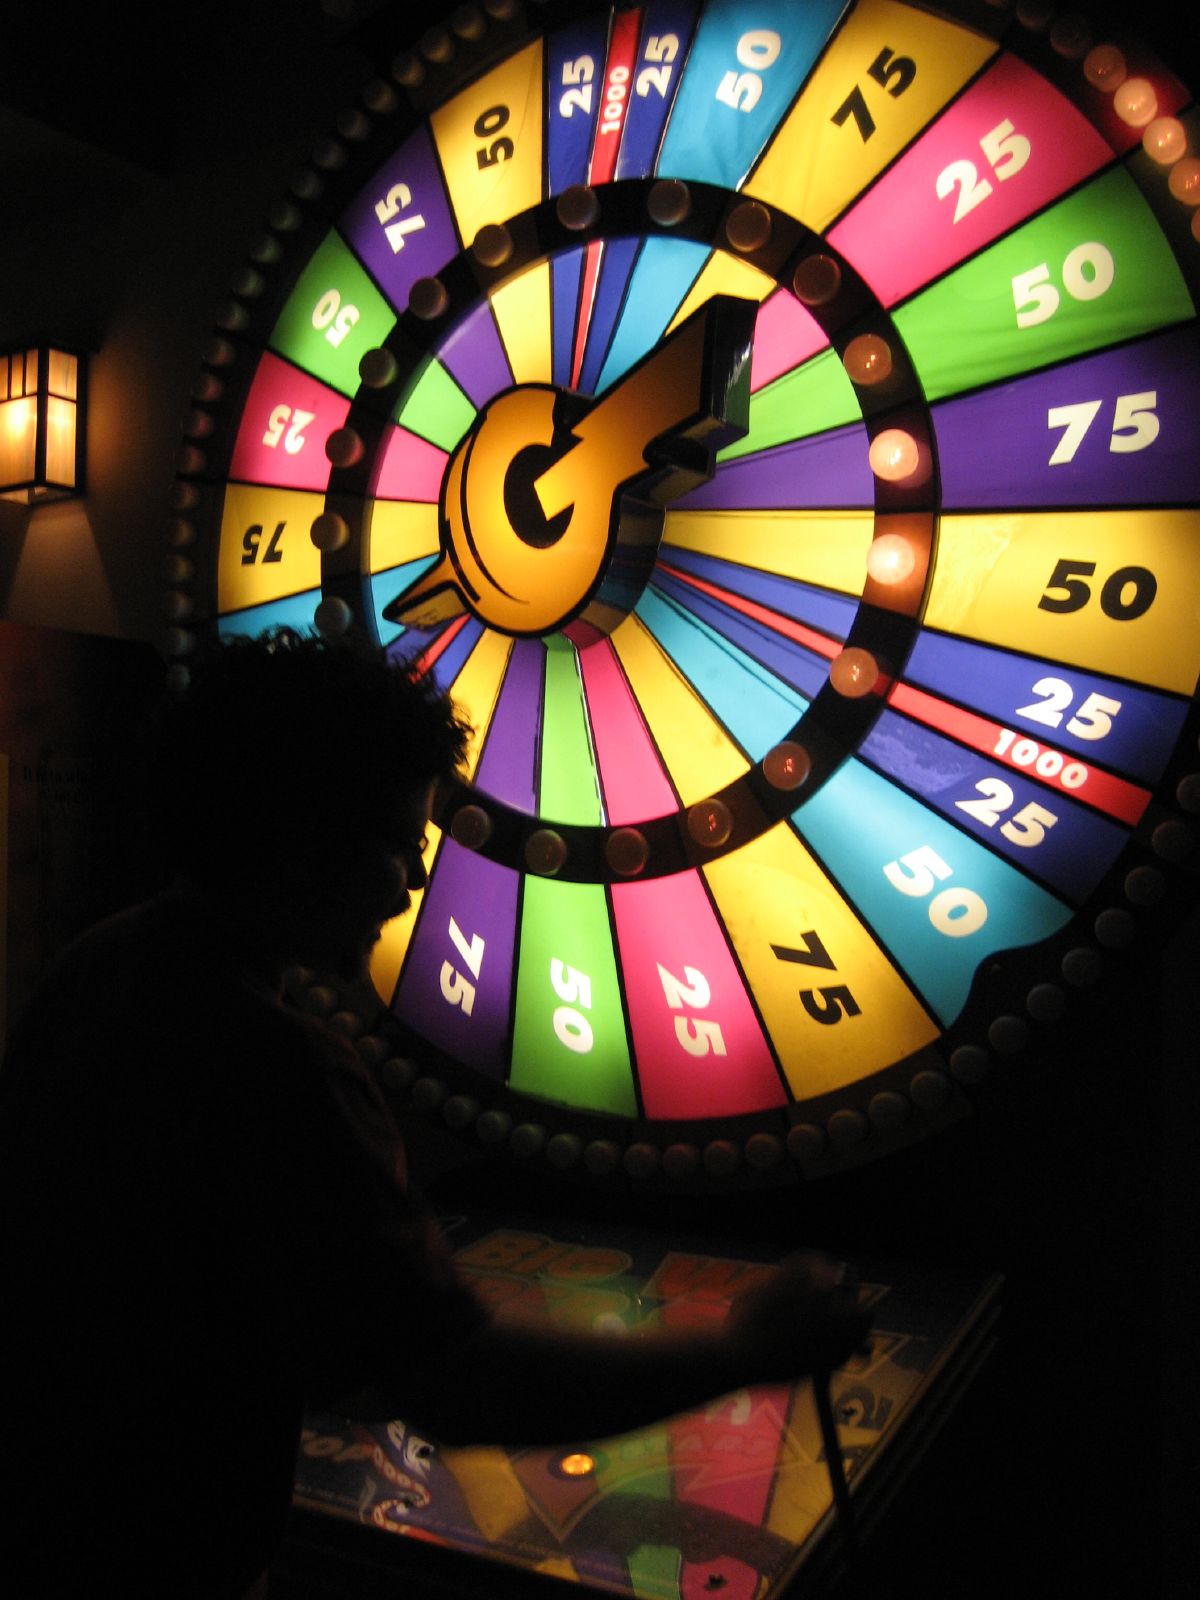 the colorful wheel of fortune has several numbers